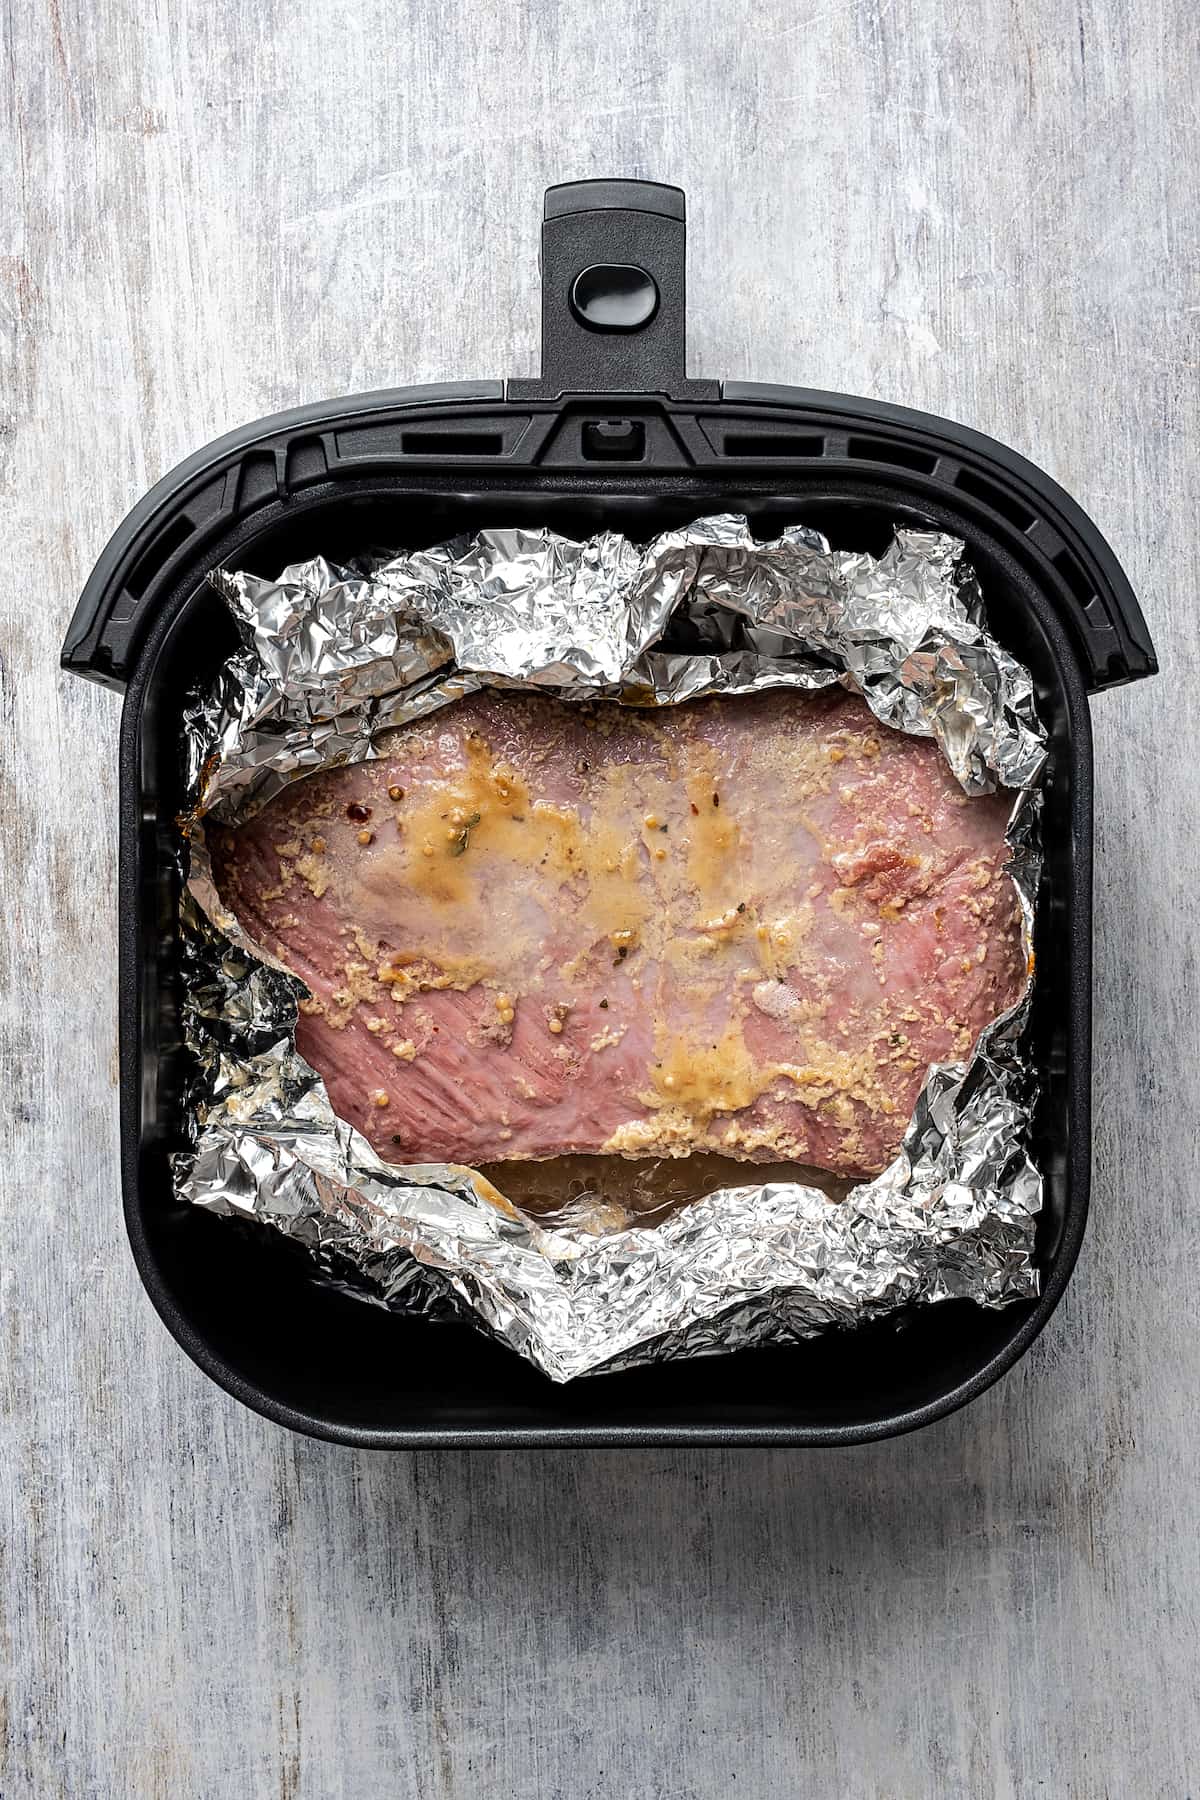 A brisket in a nest of foil in an air fryer.